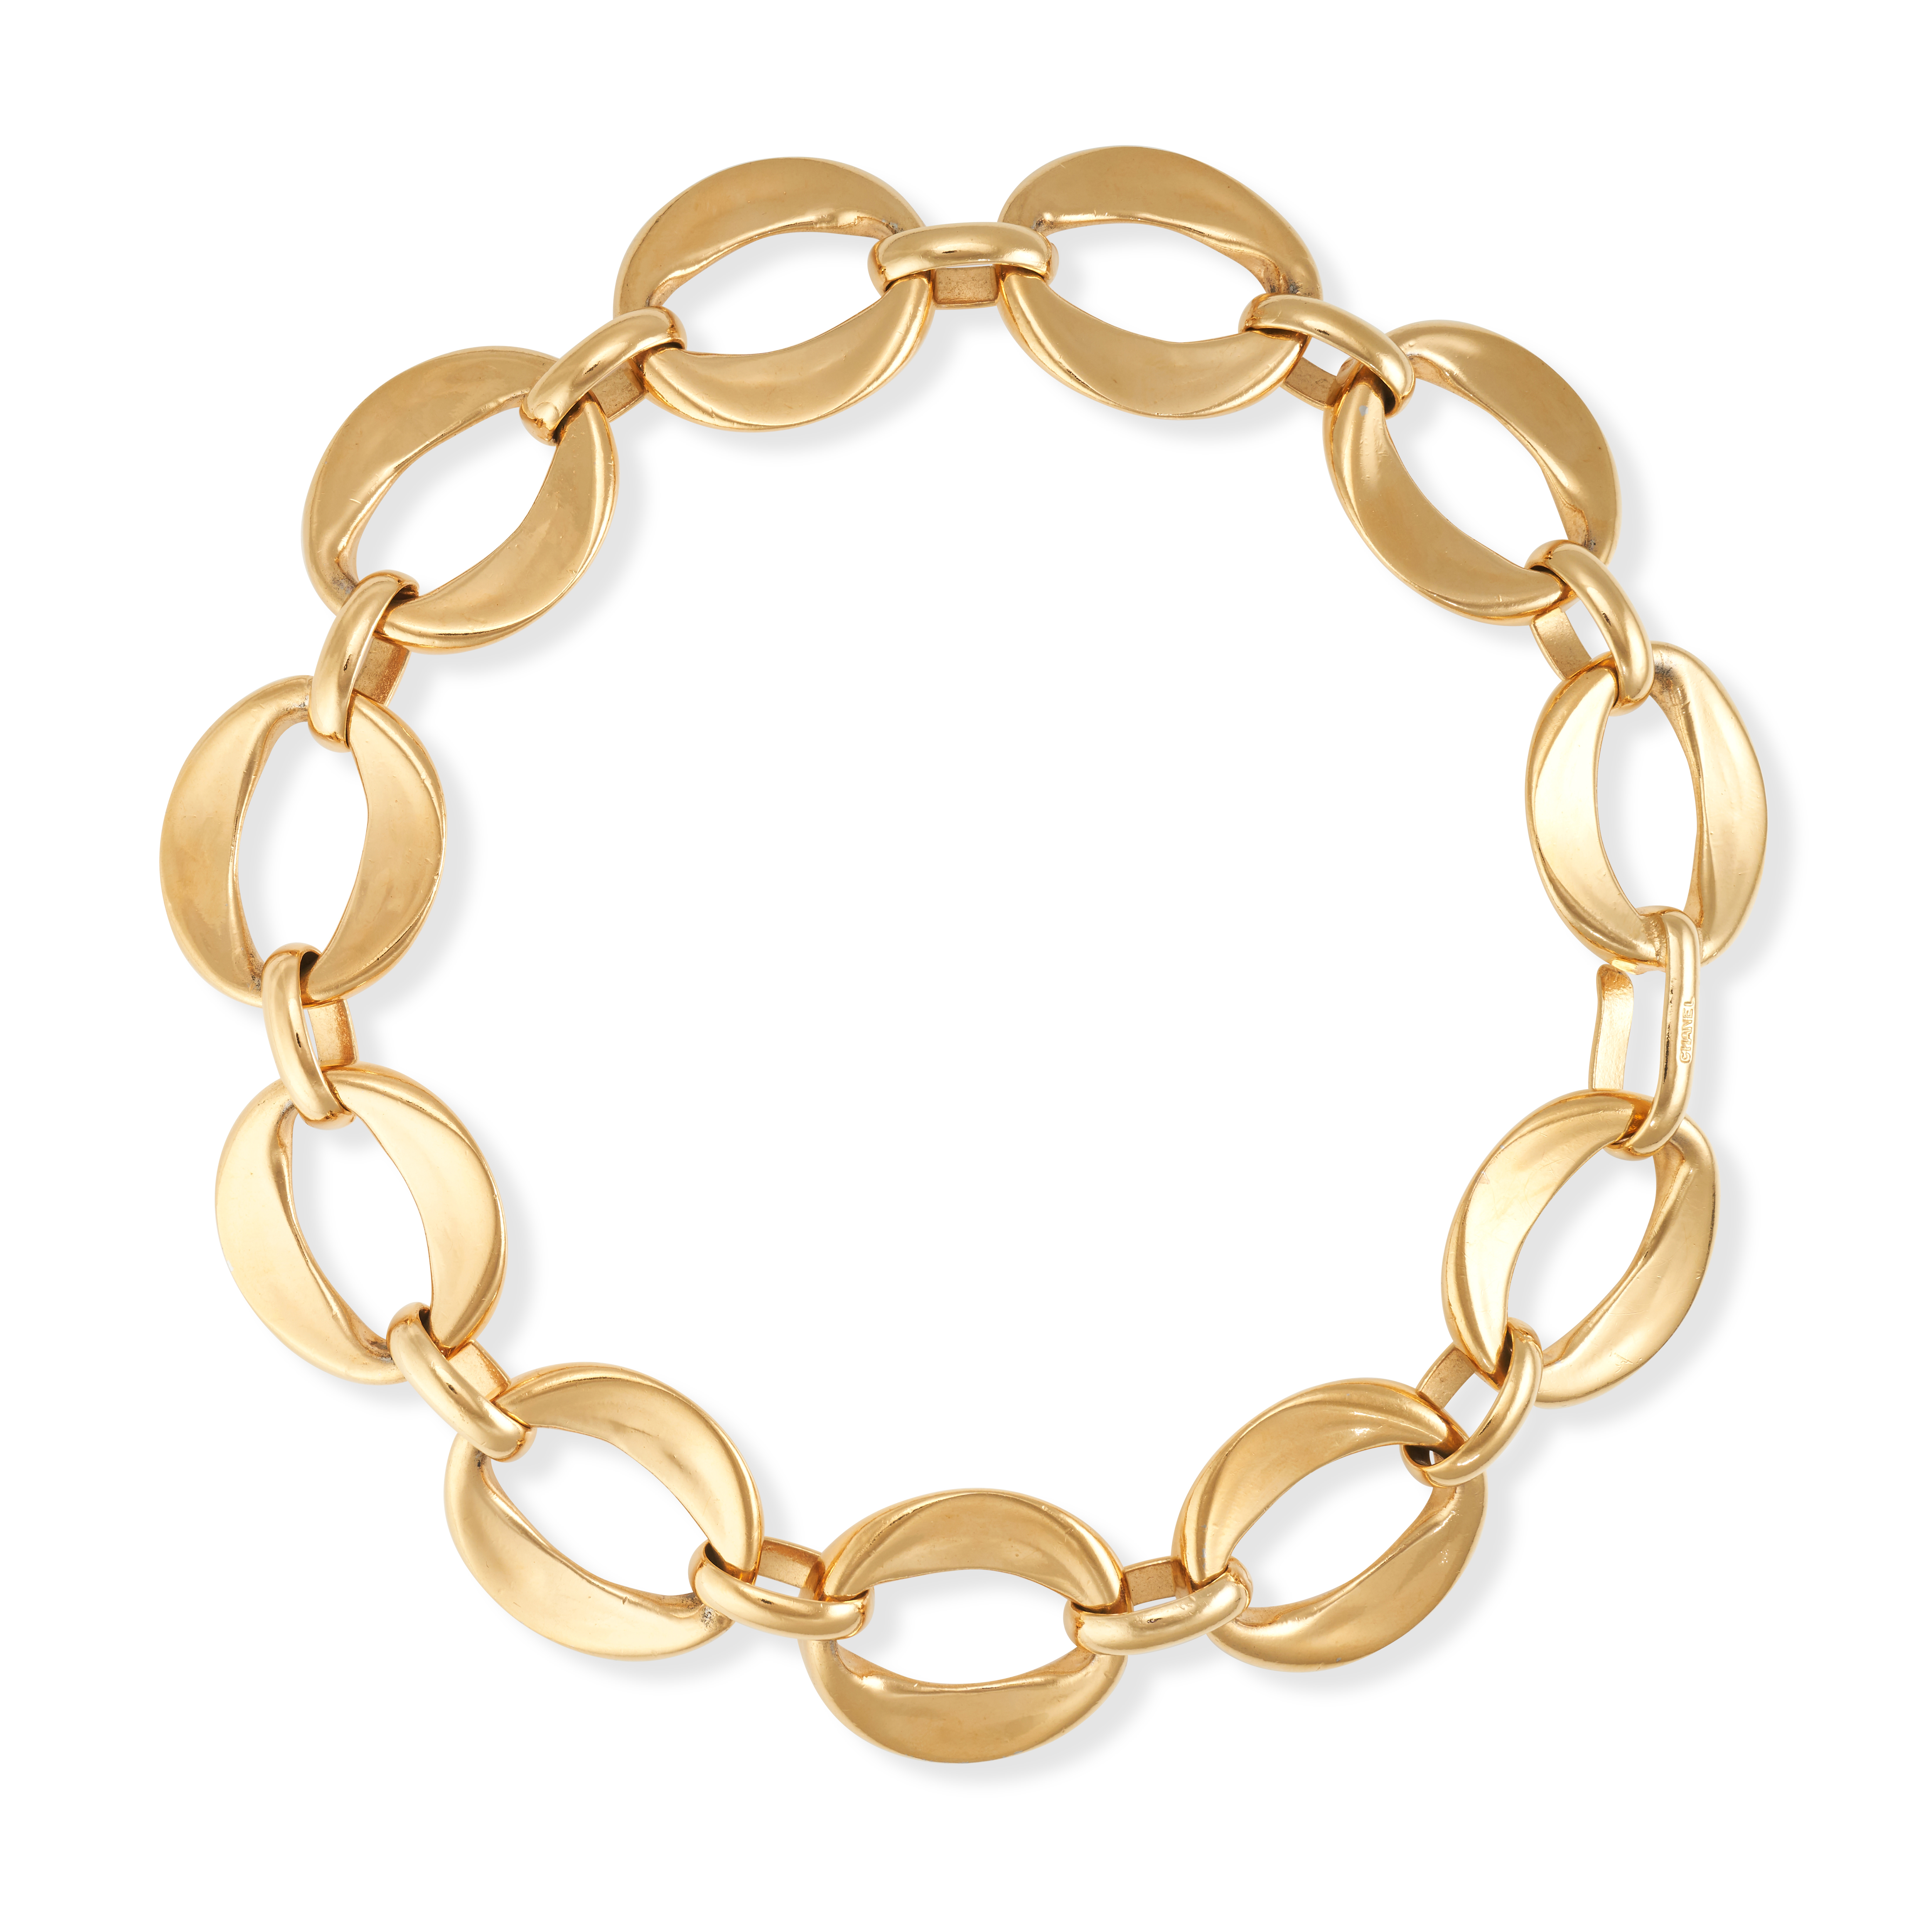 CHANEL, AN OVAL LINK CHOKER NECKLACE comprising oval flat links alternating with smaller chain li...